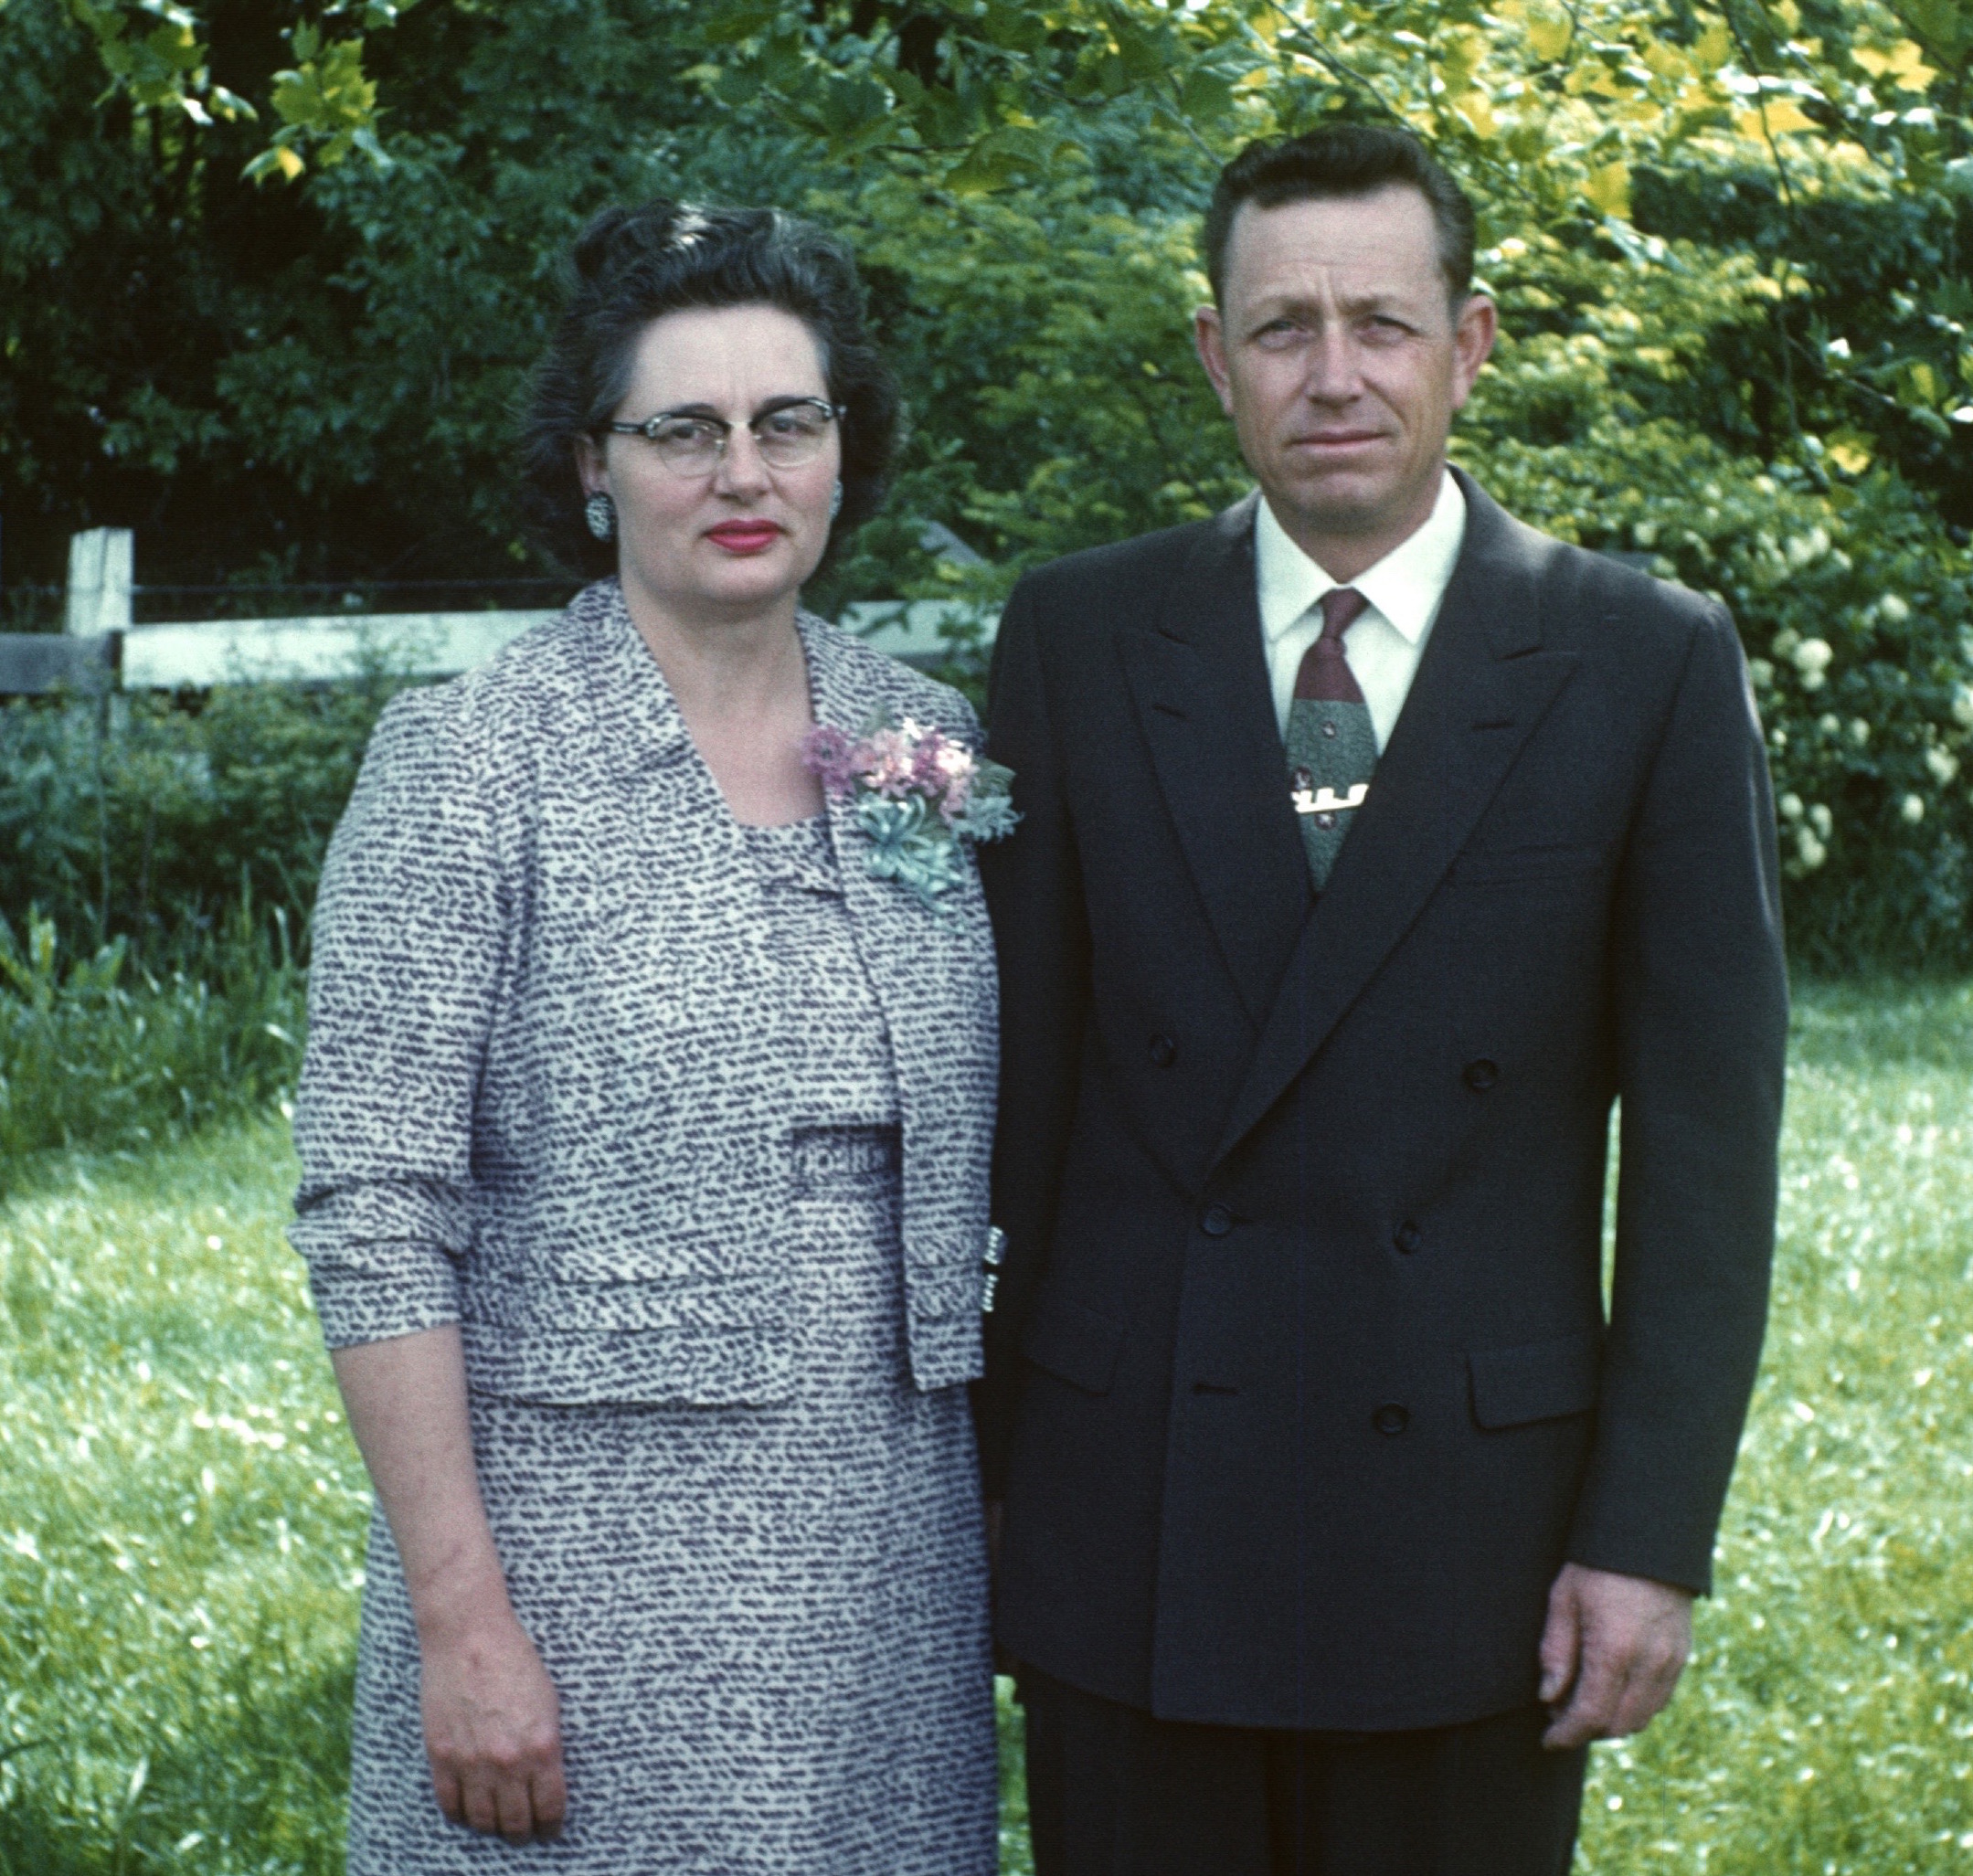 Grace and Harold Crouch about 1962